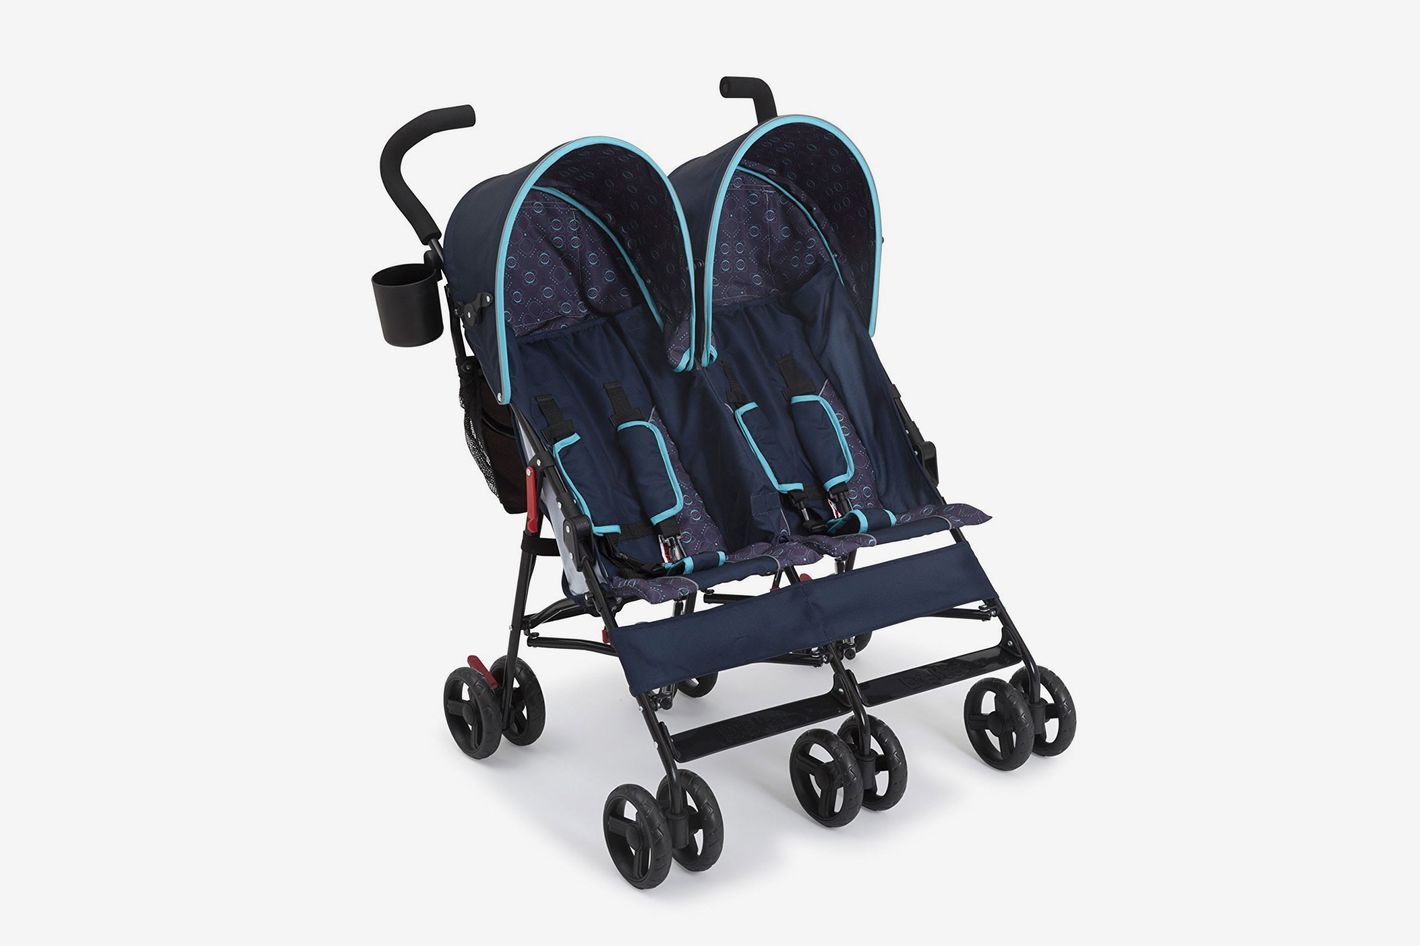 Best compact double stroller